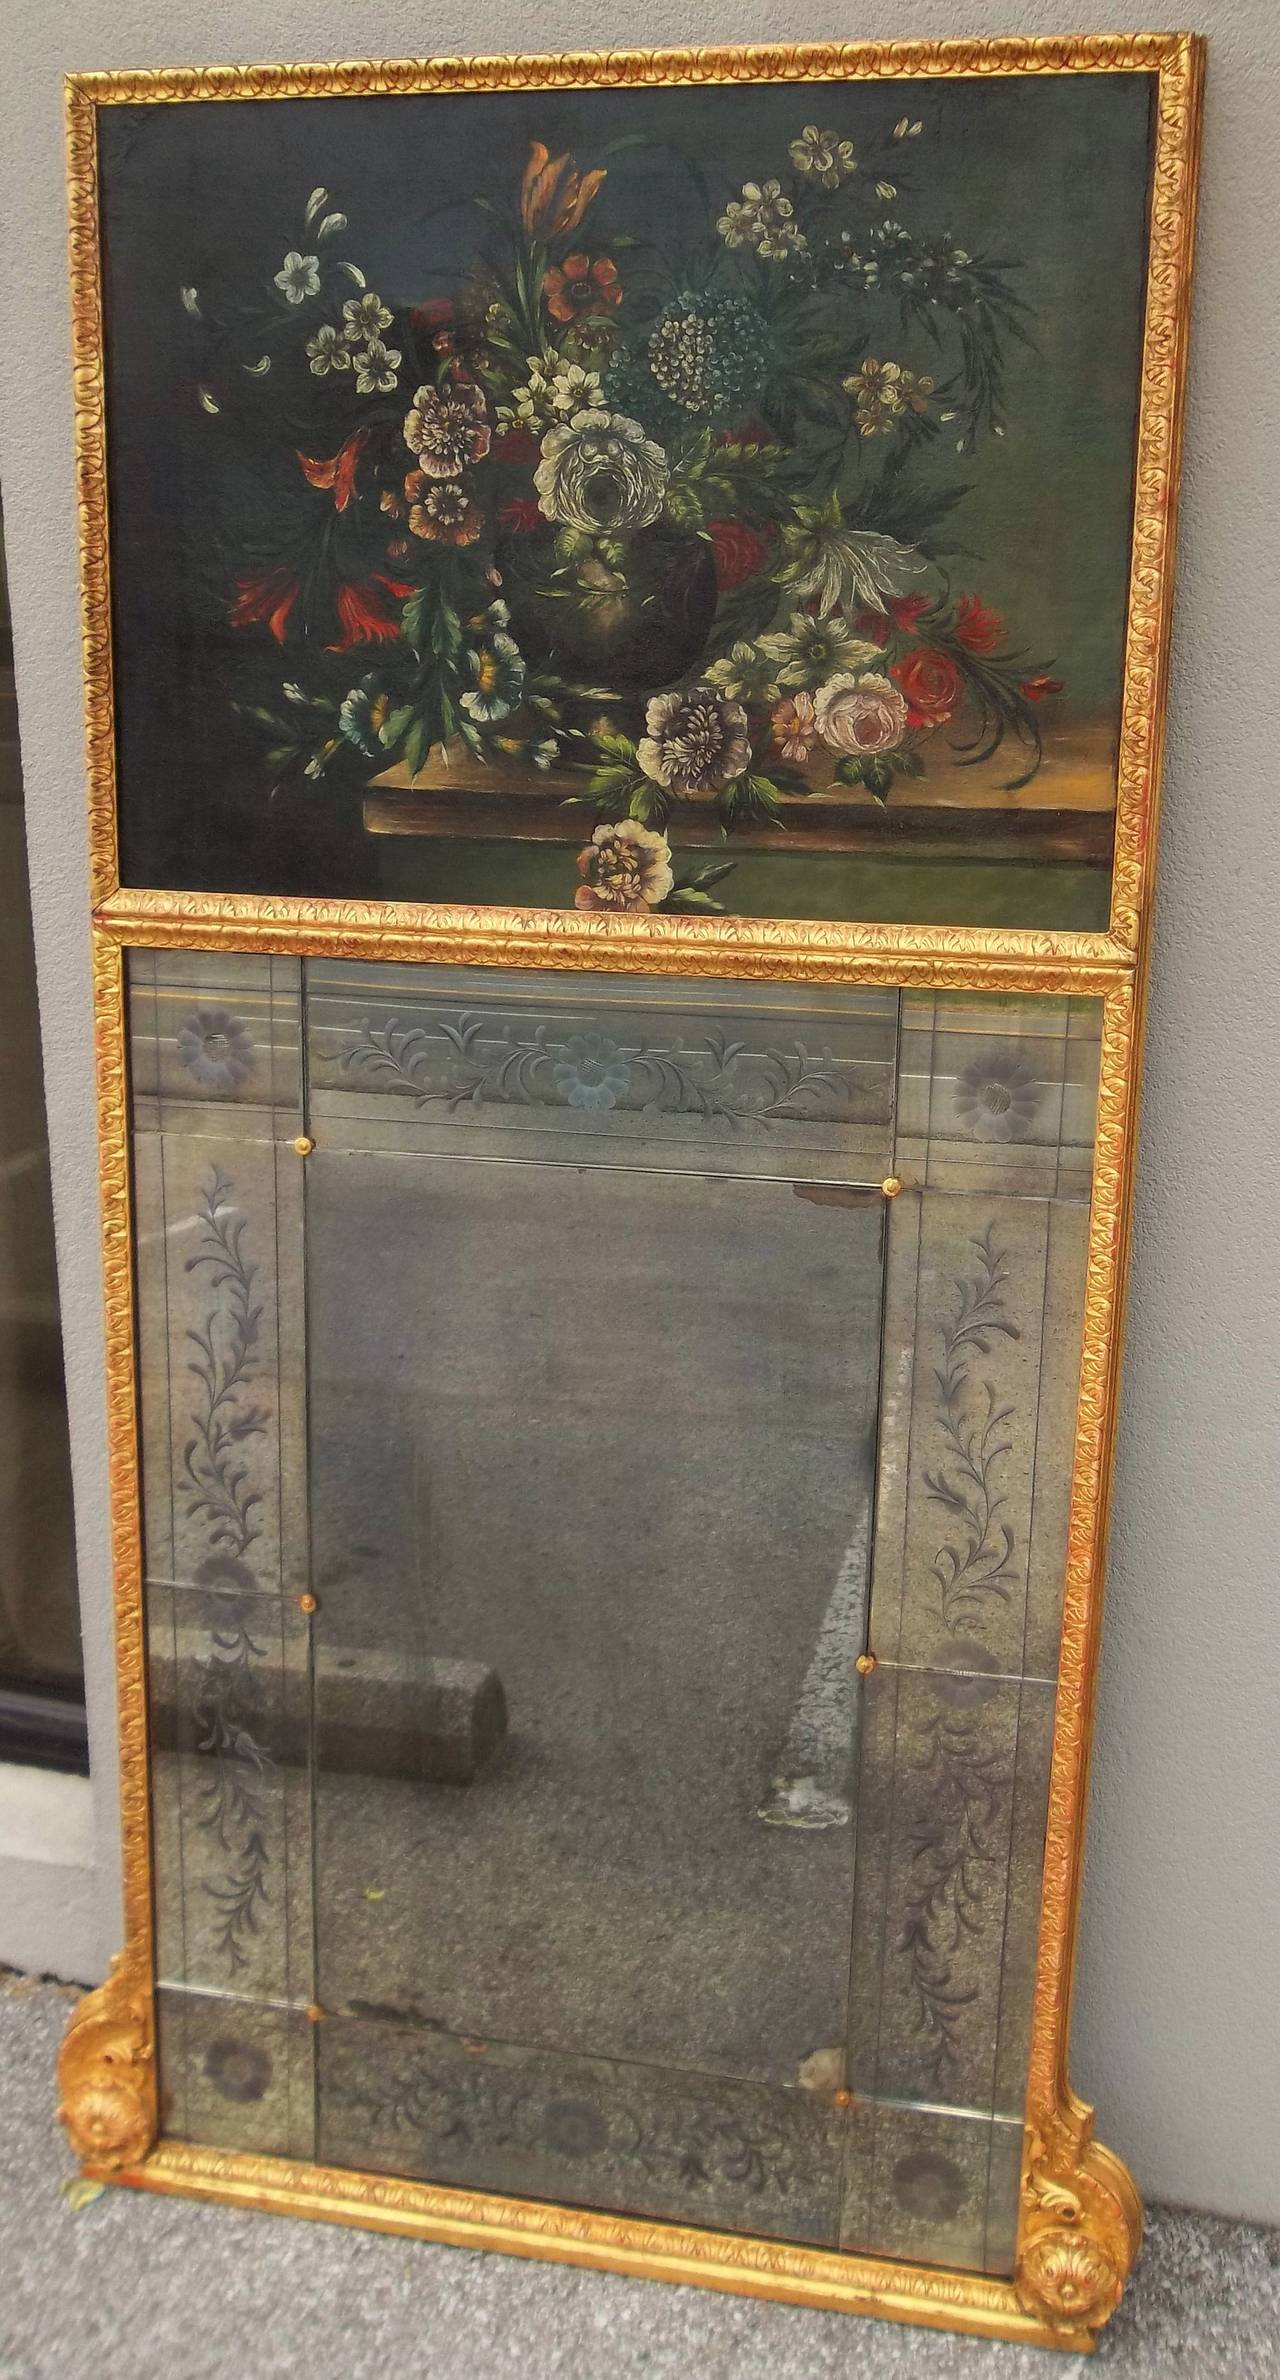 Rich lemony gold leaf frame with red bole bleeding through .The top with a floral still life, the lower a series of ten floral etched Venetian style plates encasing a larger unadorned central plate. All plates in crack free condition but with some